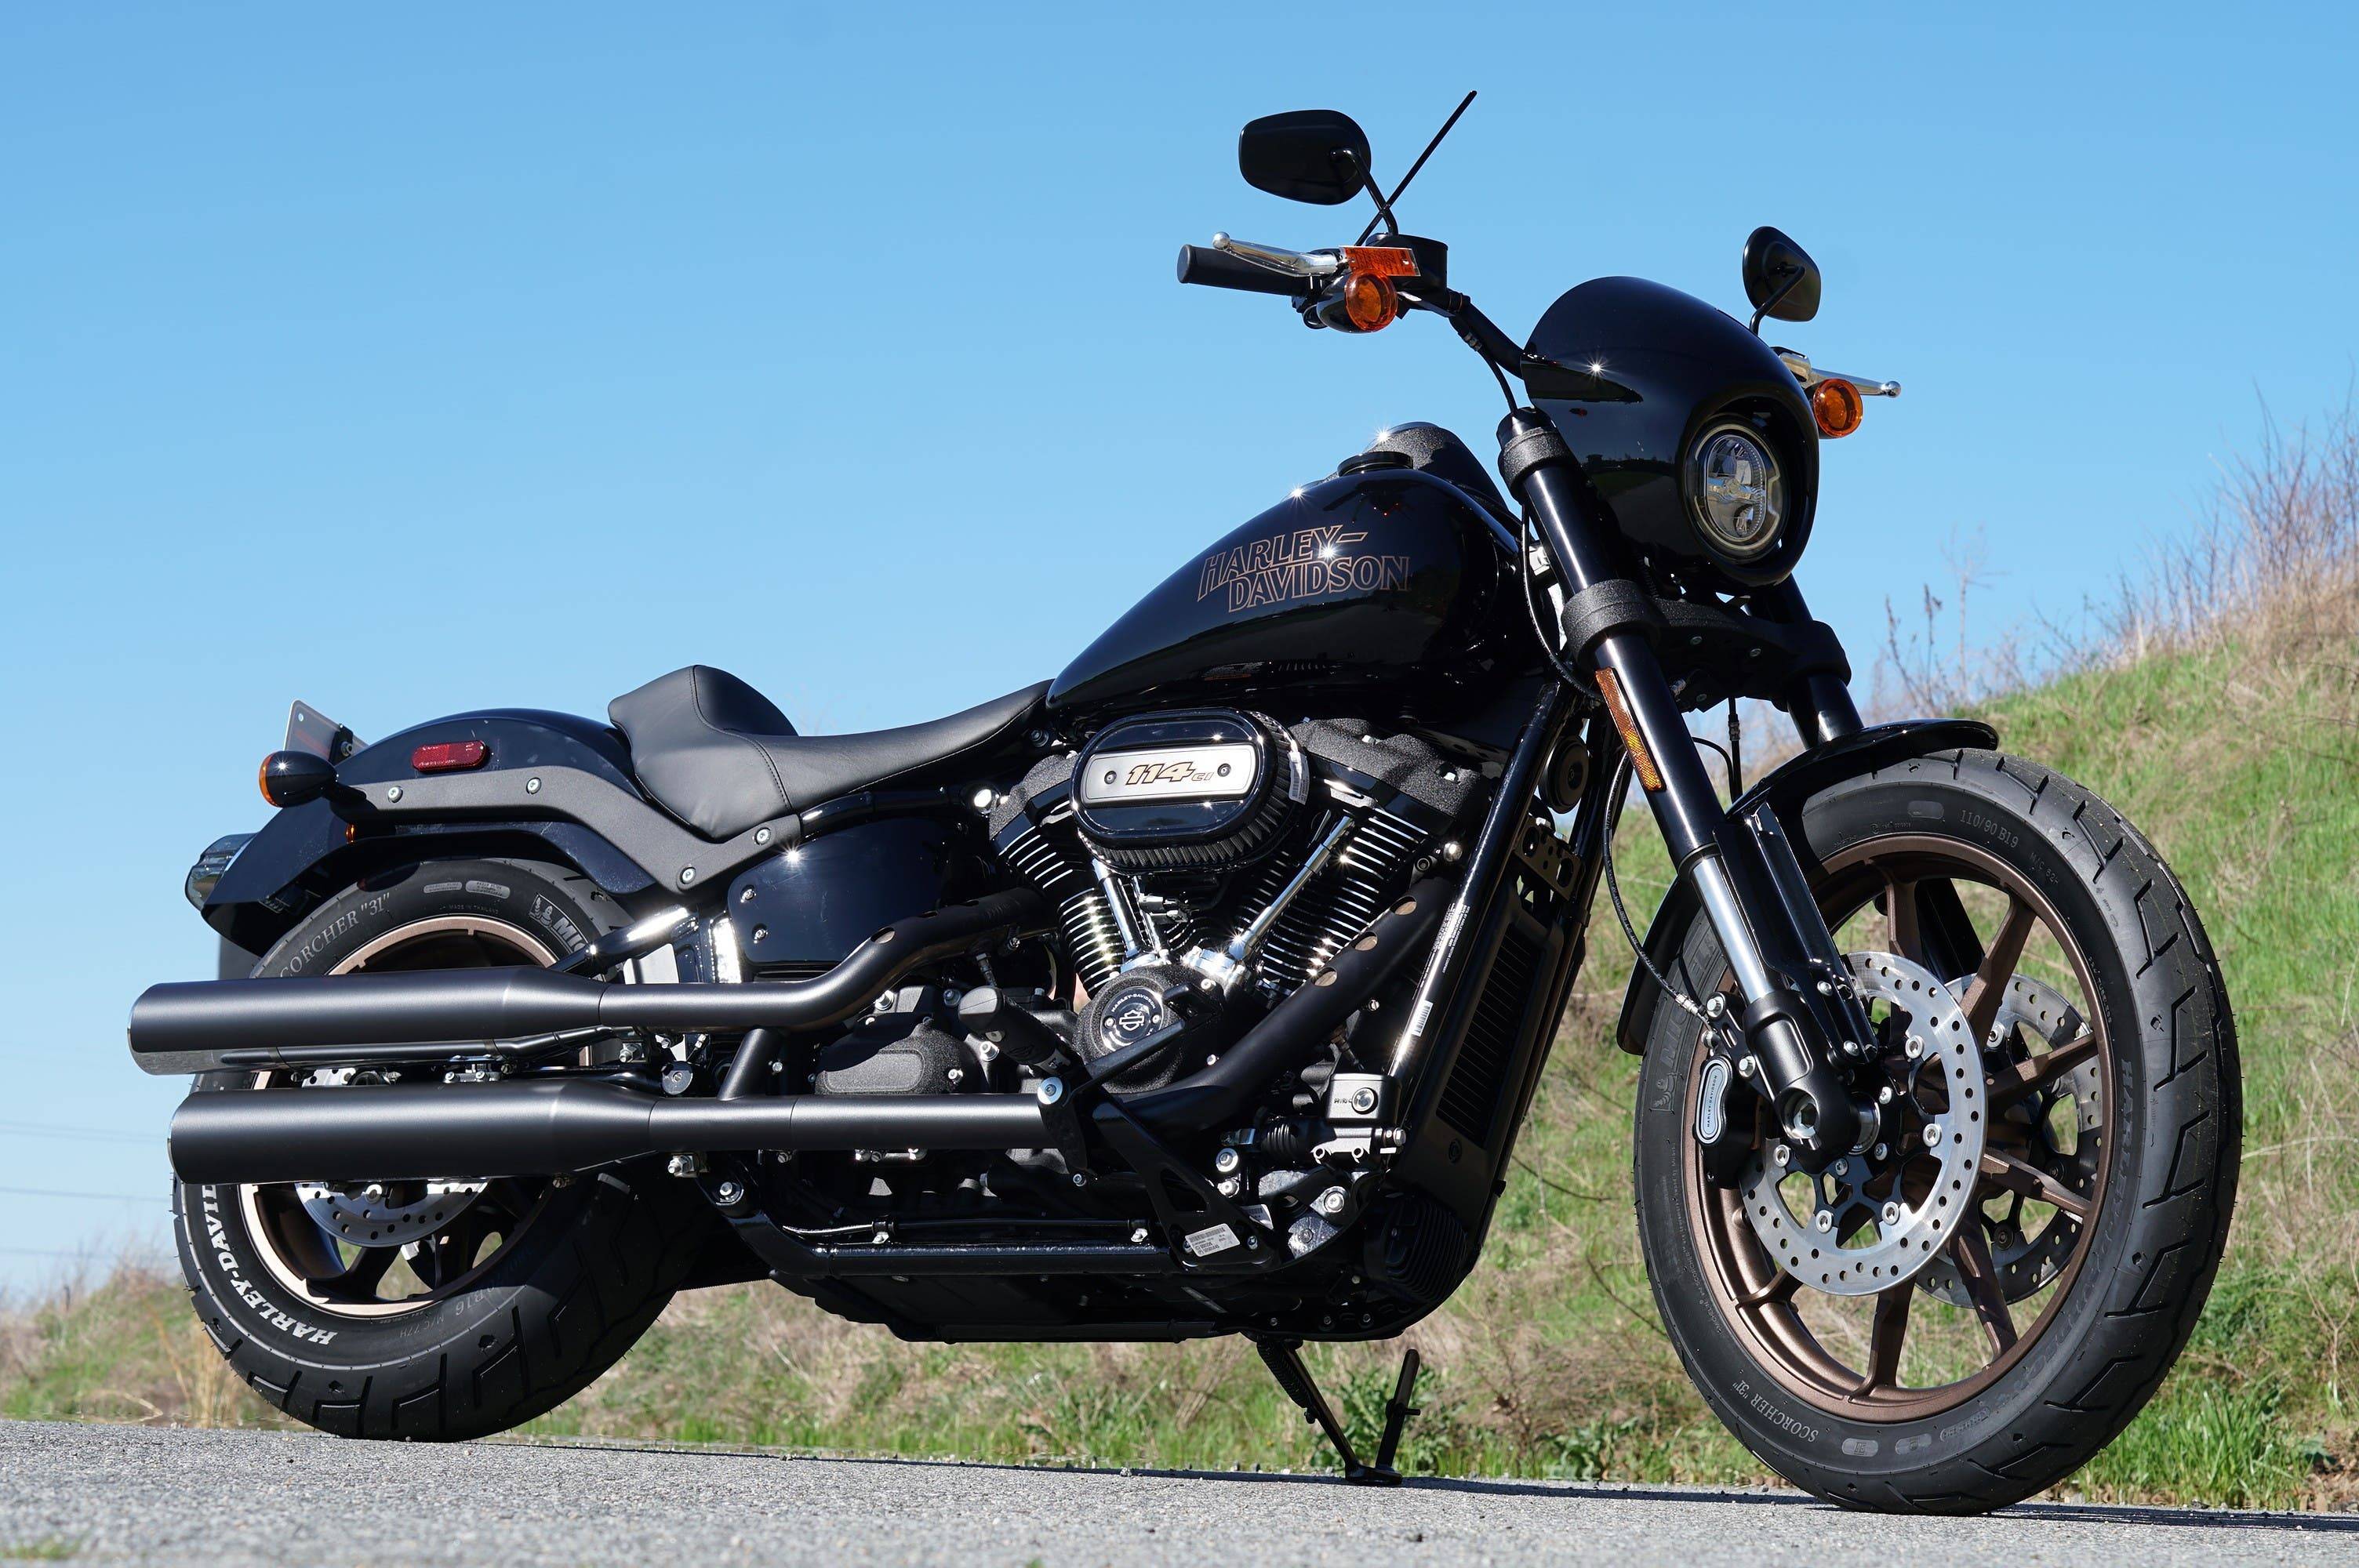 2020 Harley Davidson Low Rider S First Look 9 Fast Facts